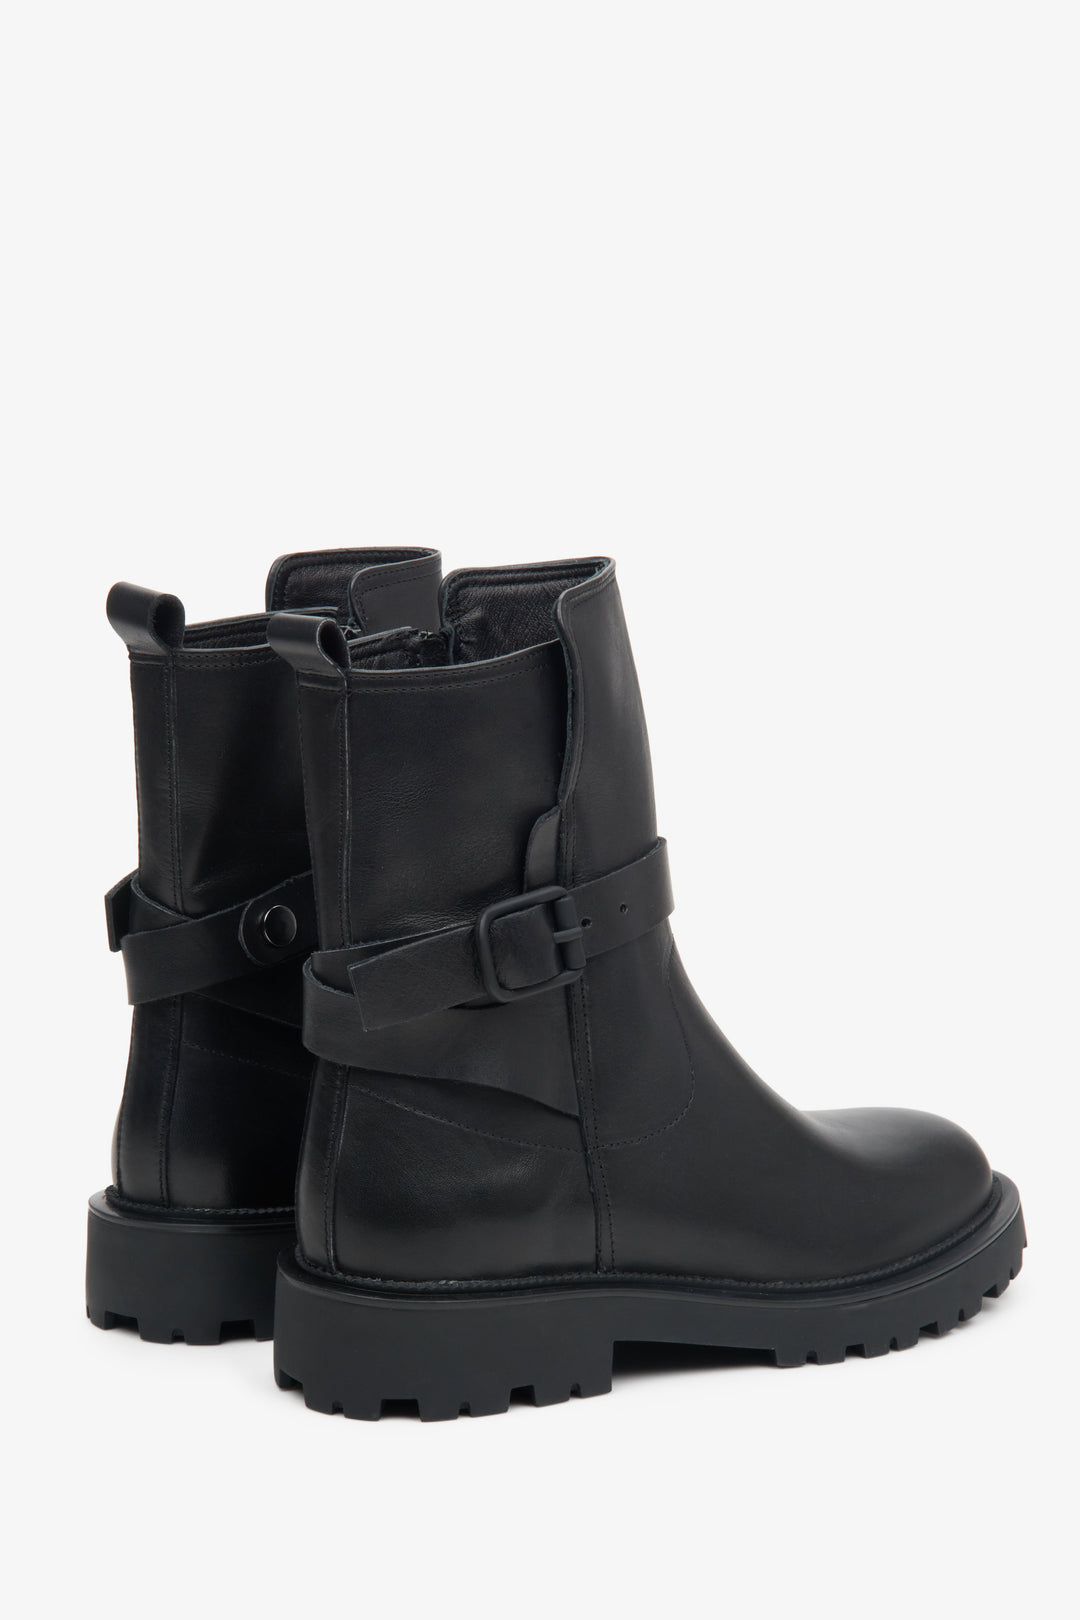 Women's black Estro leather ankle boots with soft uppers - close-up on the profile and back of the boots.